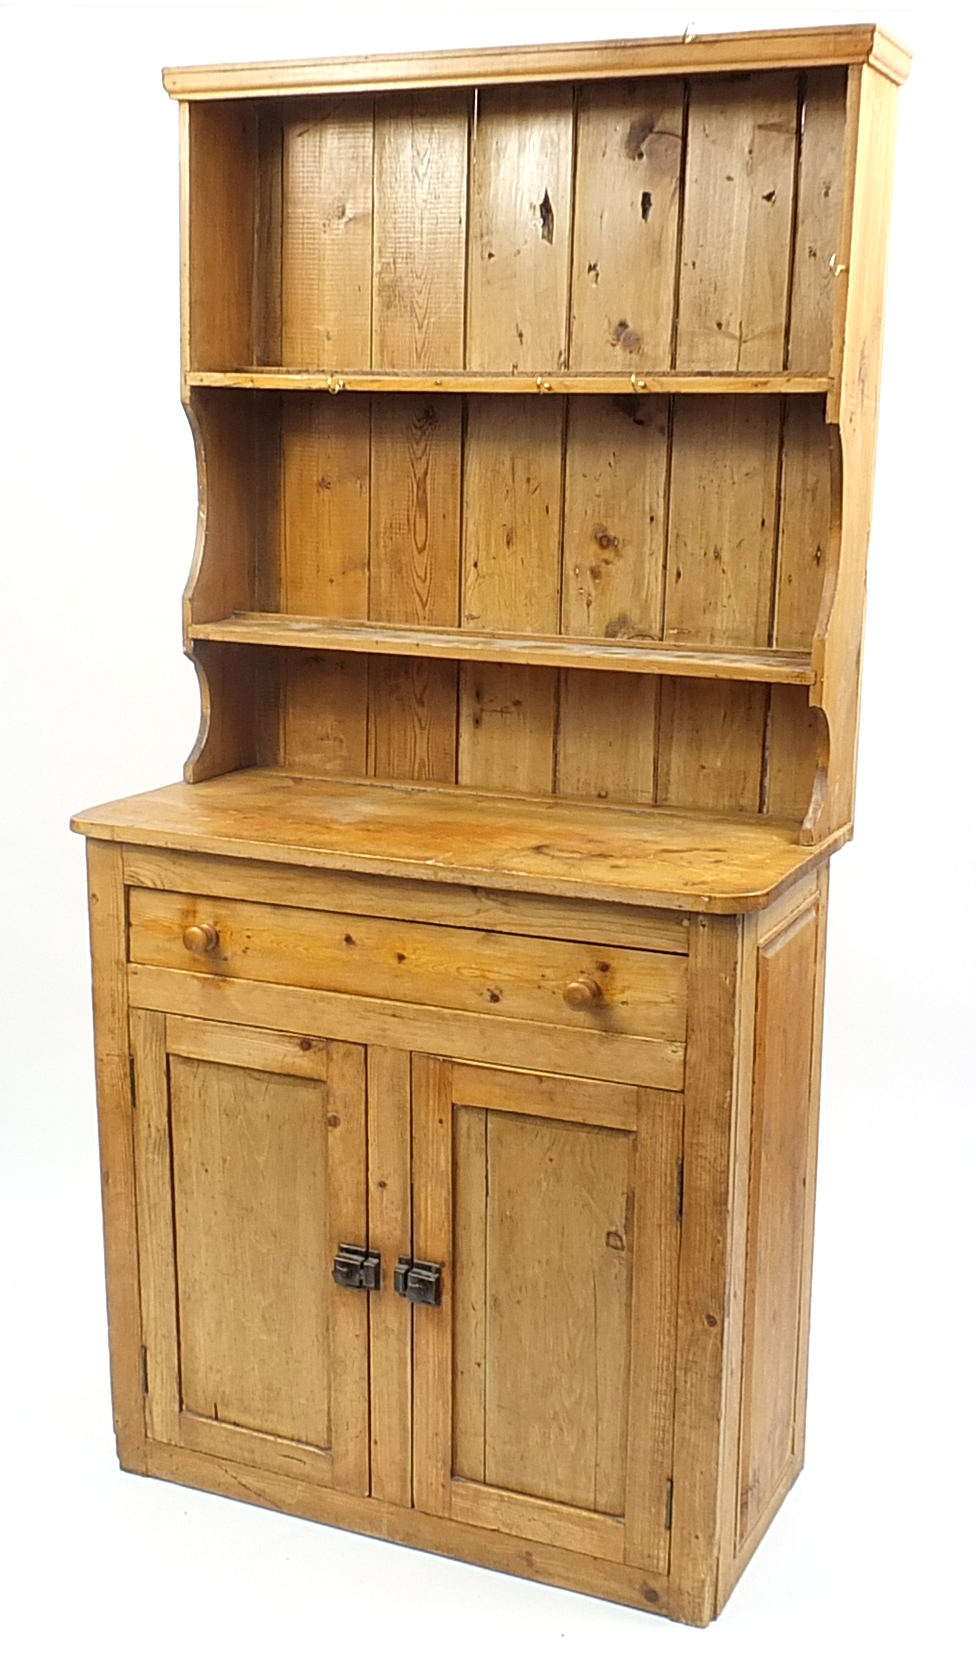 Pine dresser with open plate rack above a drawer and cupboard base, 182cm H x 90cm W x 44cm D